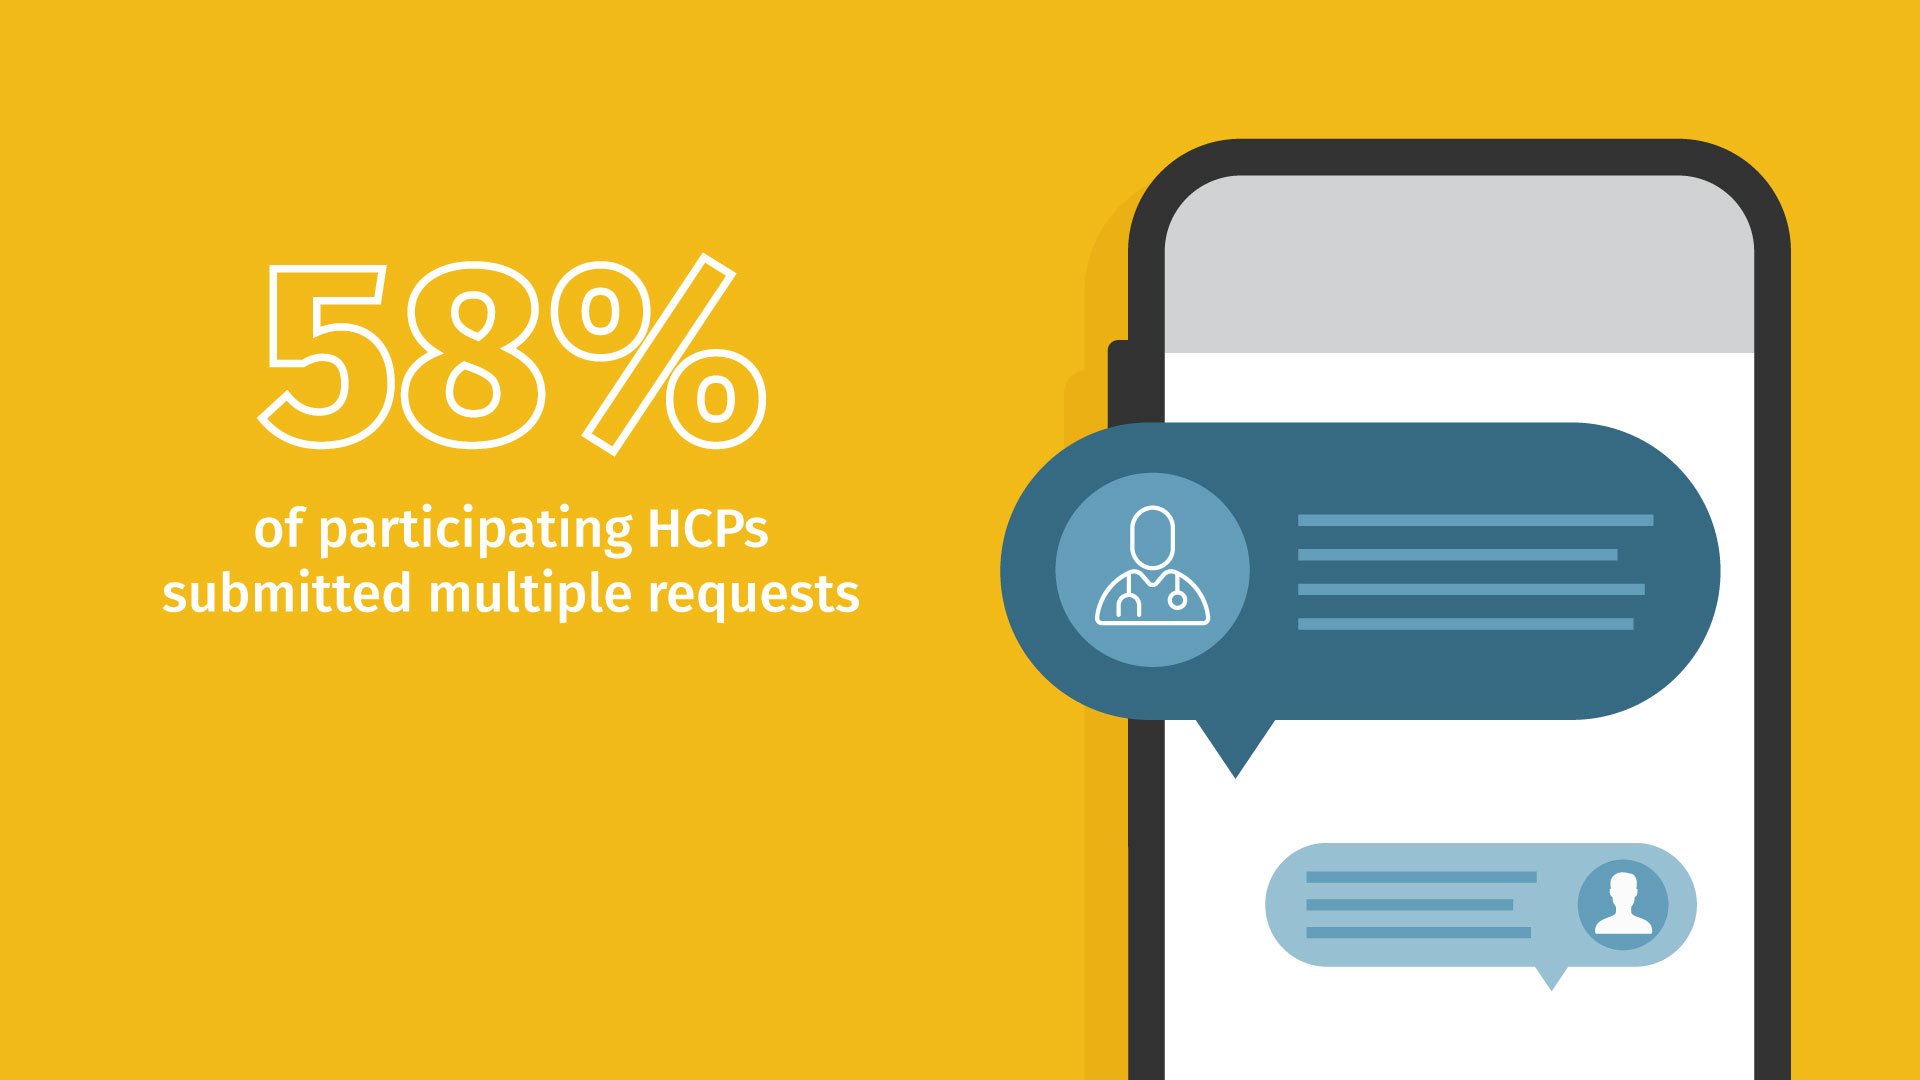 58% of participating HCPs submitted multiple requests